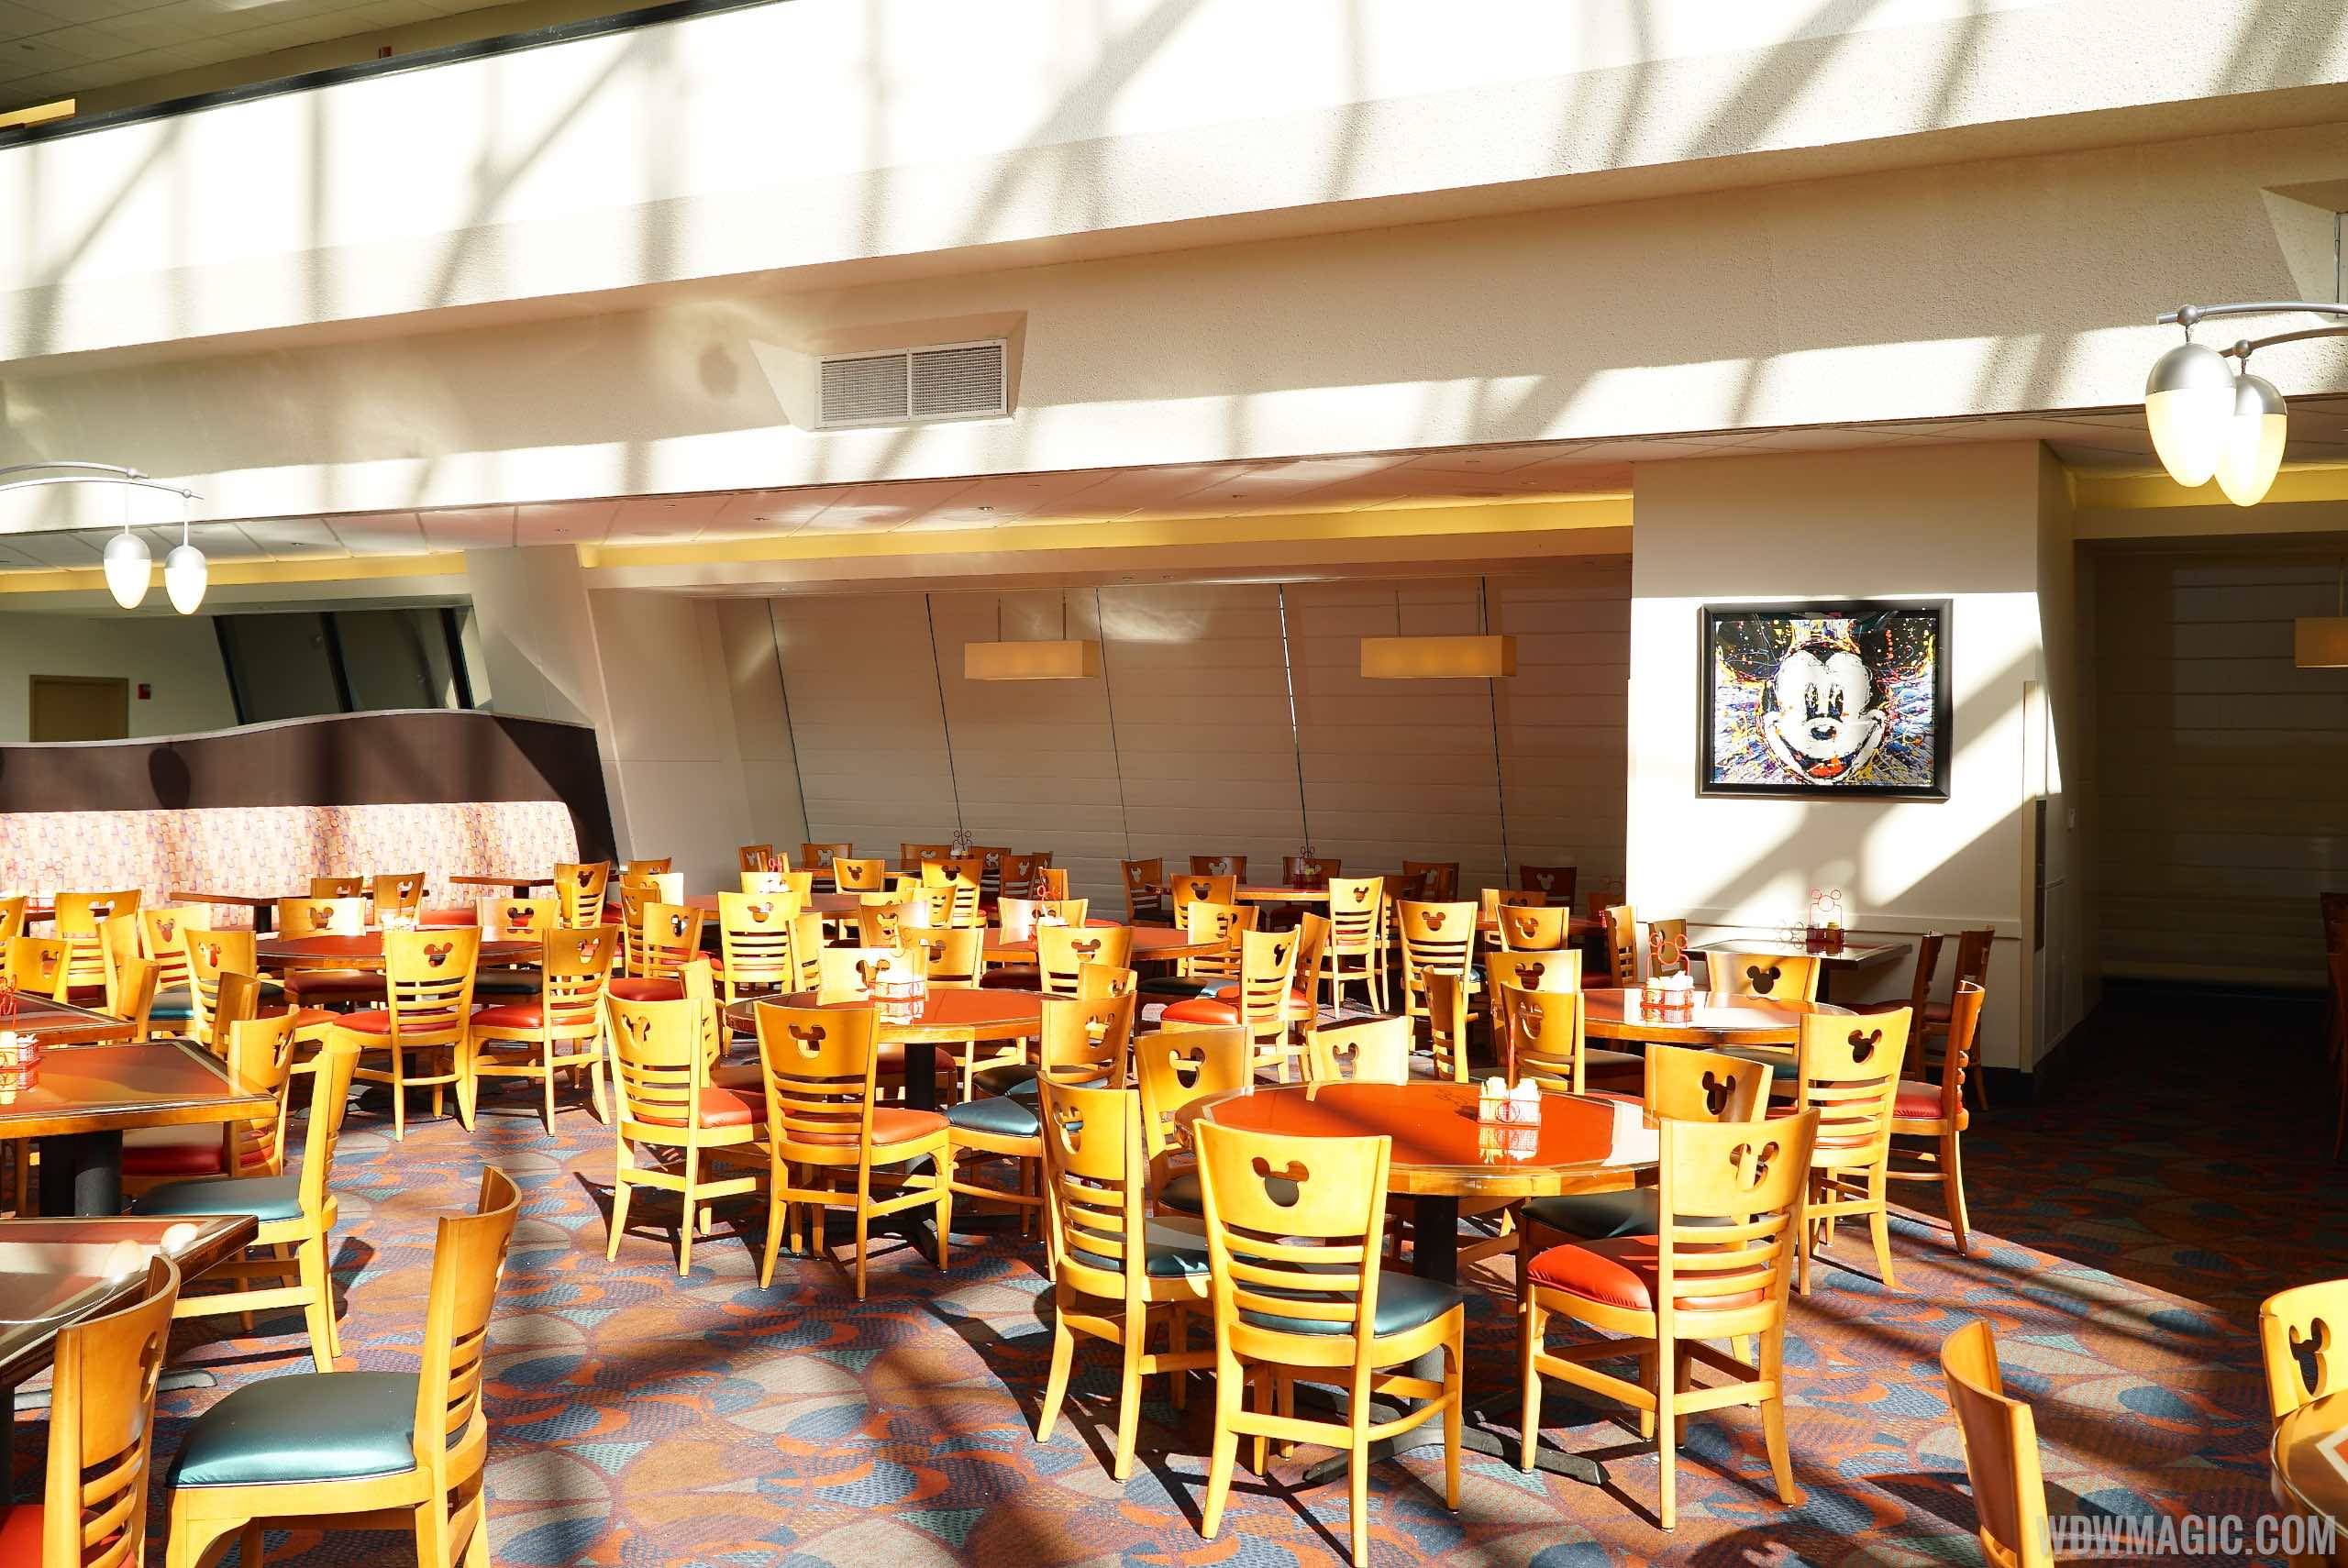 Chef Mickey's adding a Character Lunch Buffet to meet free dining demand through to September